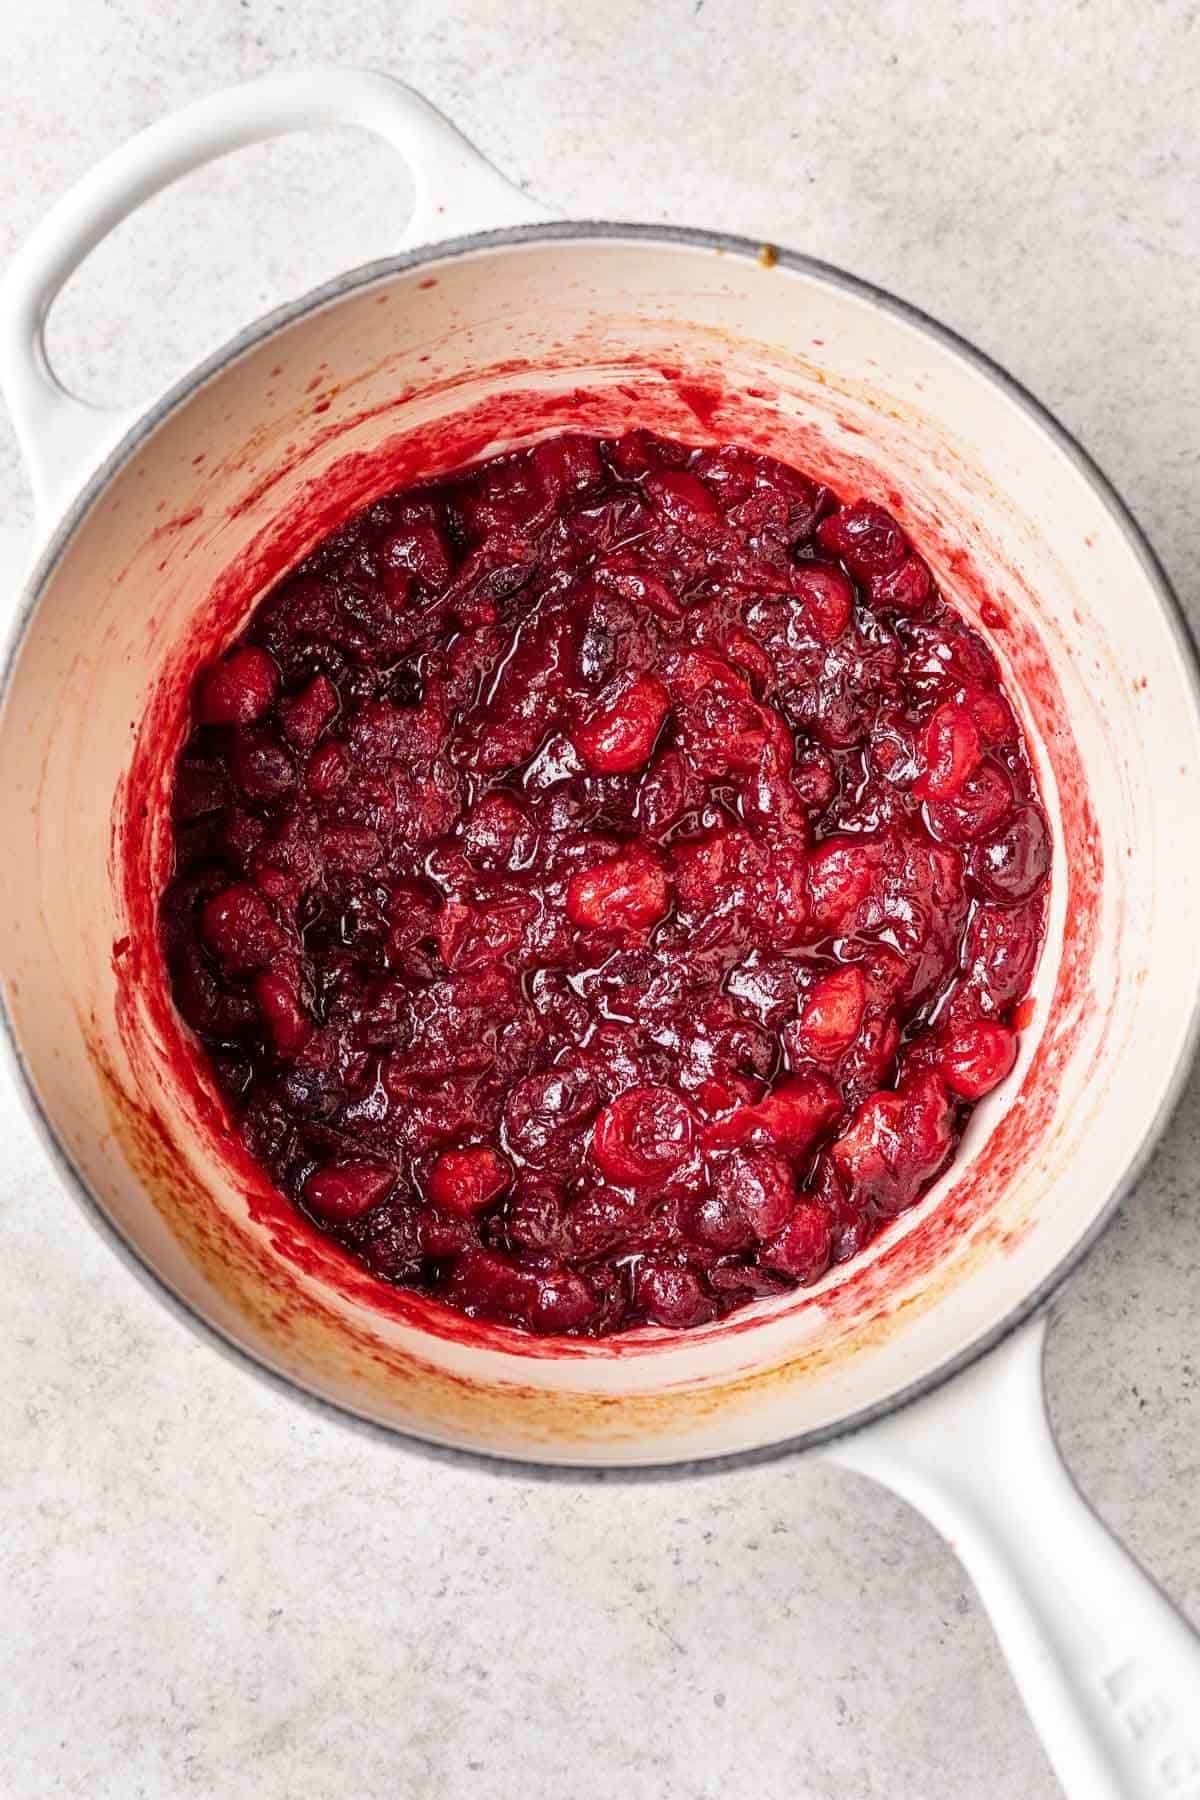 Texture of cranberry sauce after 10-15 minutes of cooking.